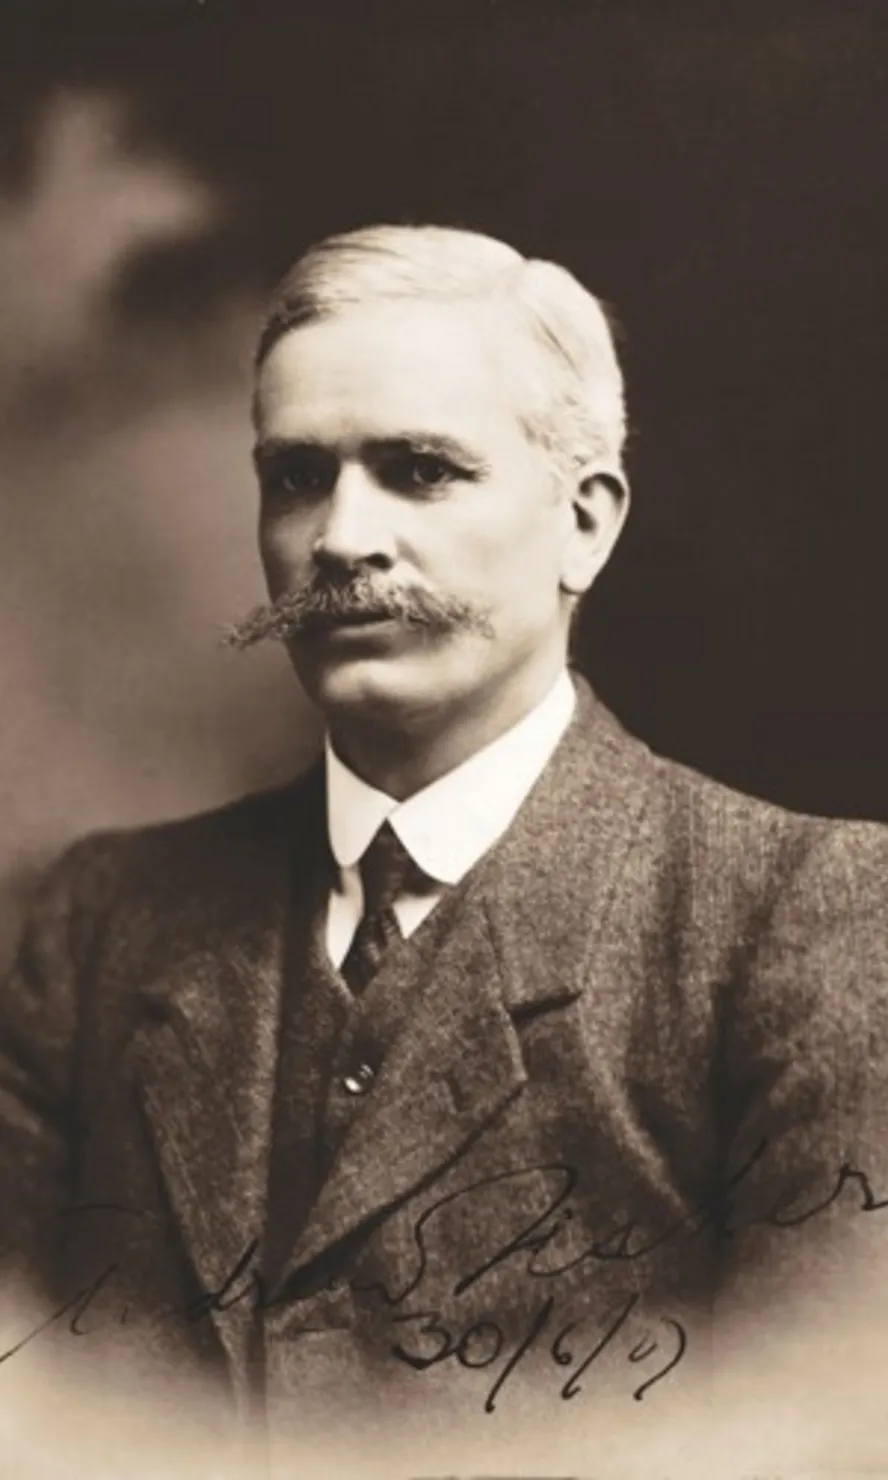 Black and white portrait photograph of Andrew Fisher, wearing a three-piece suit and sporting a long moustache.